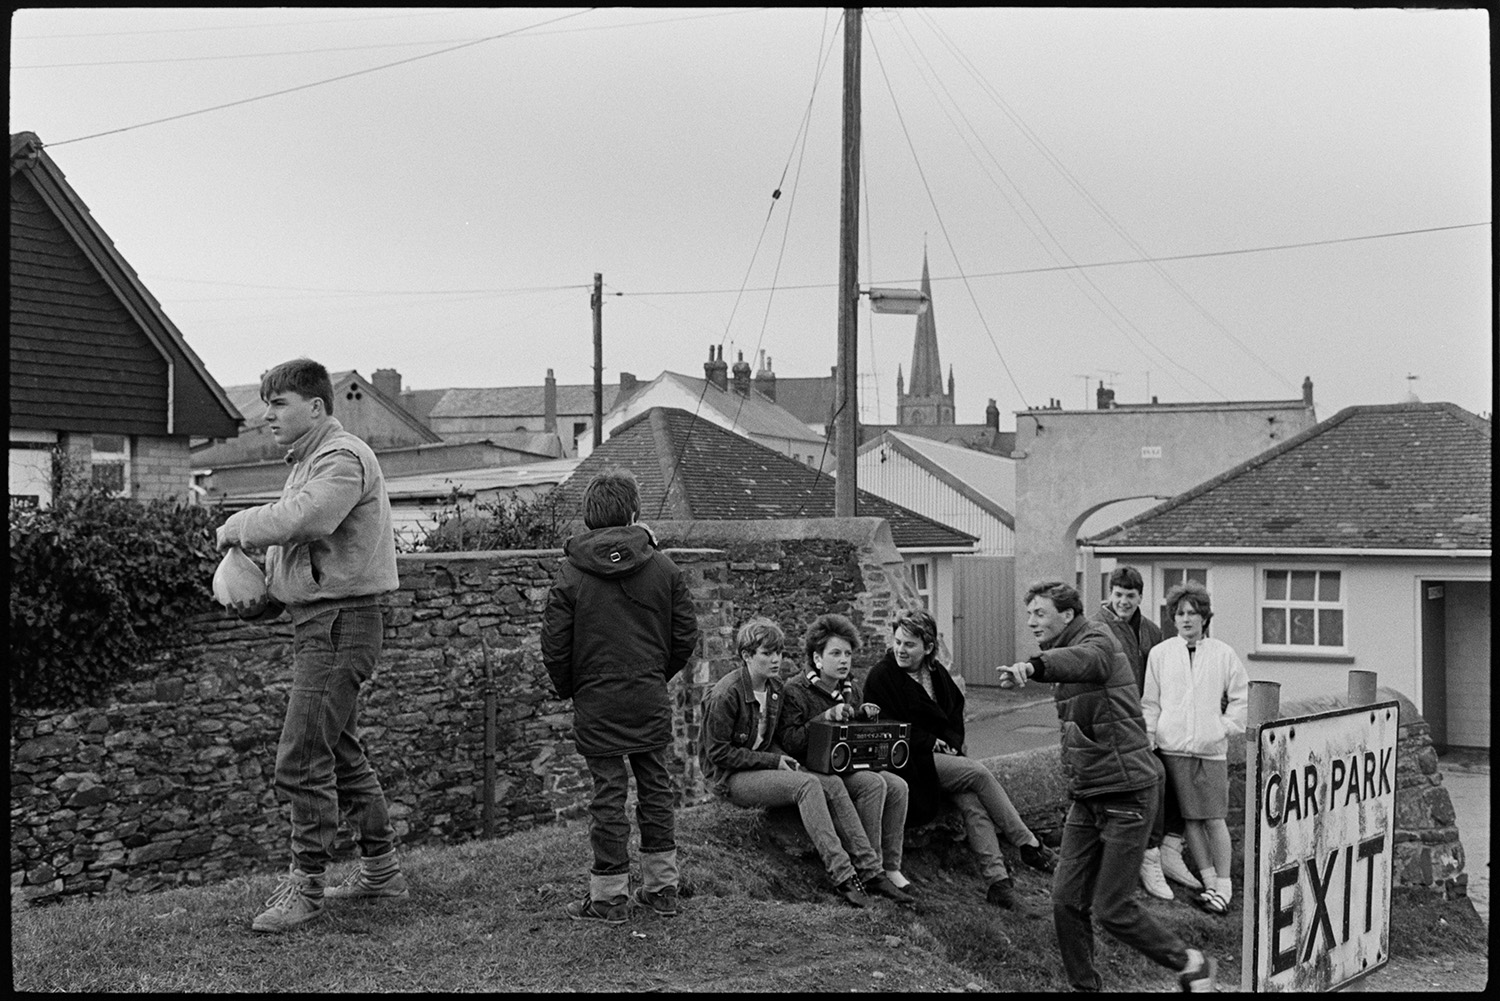 Teenagers sat on a grassy bank by a wall in a car park. One of them is holding a stereo and another is walking across the bank holding a water balloon. Rooftops can be seen in the background.